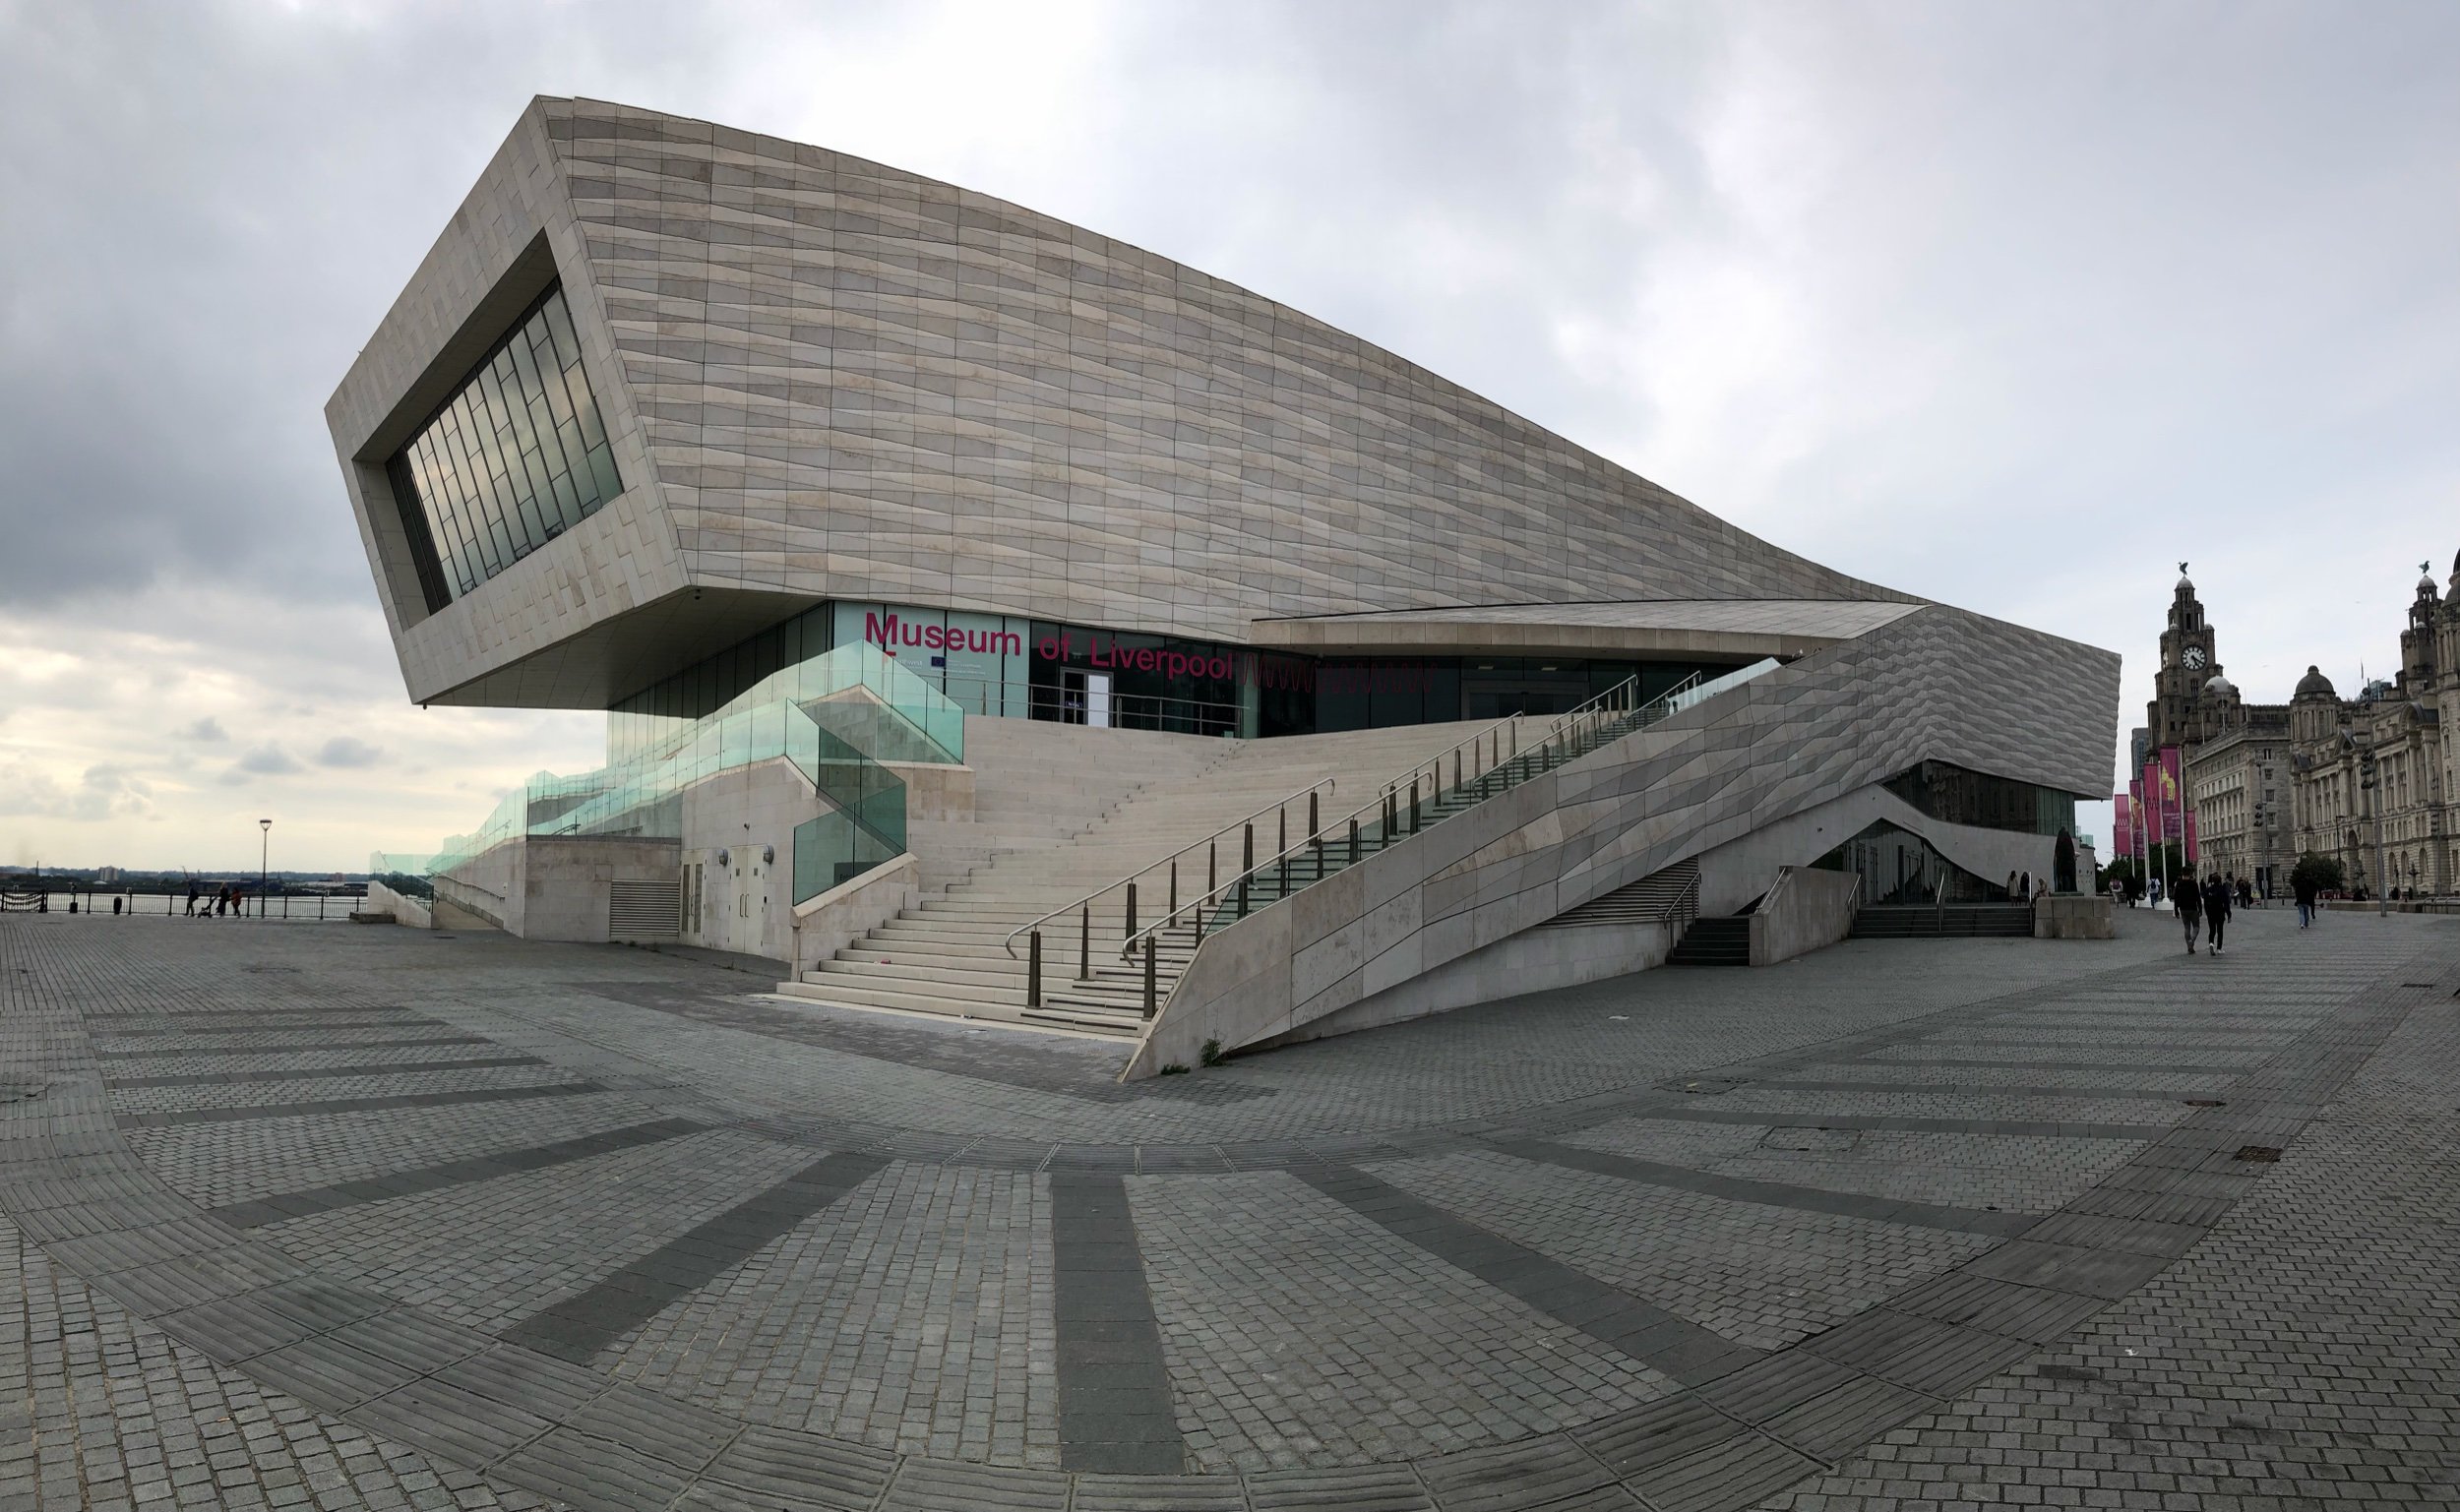  The Museum of Liverpool is a very cool, modern building. And was in Dr. Who this season! 